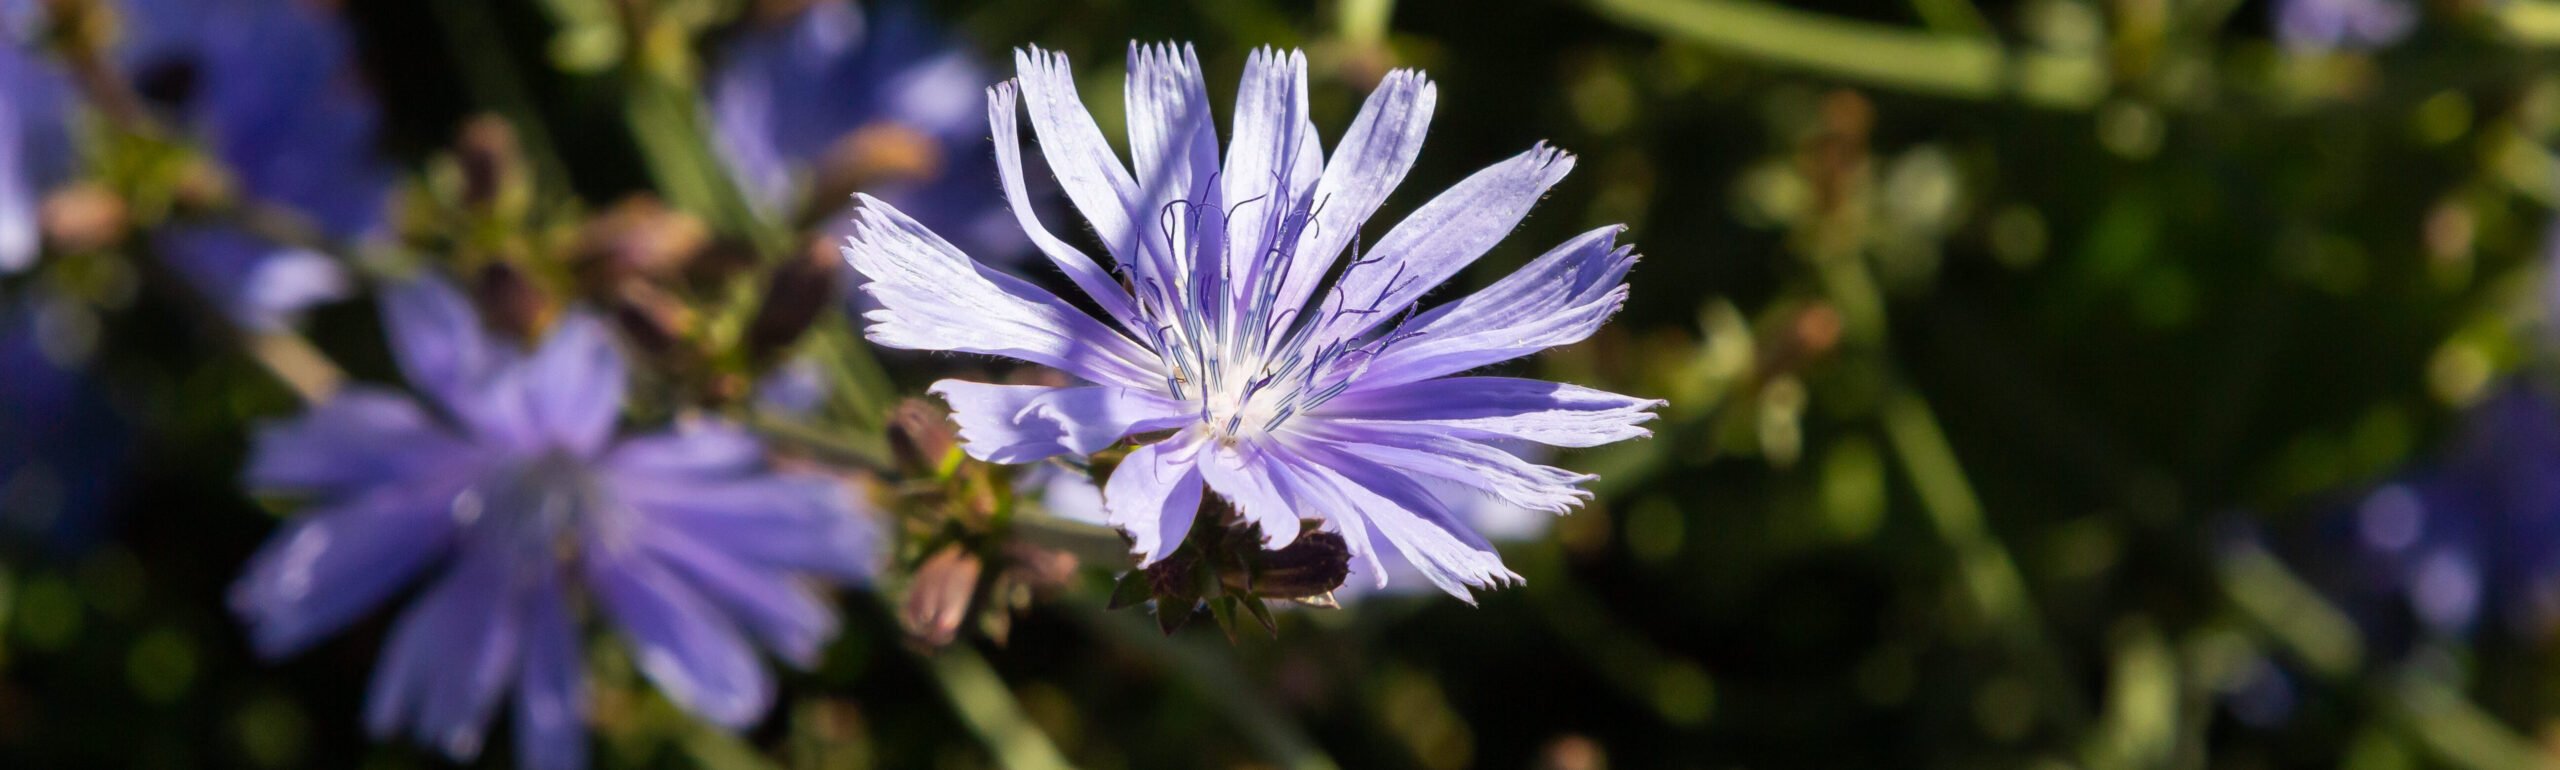 close up. Violet Cichorium intybus blossoms, called as sailor, chicory, coffee weed, or succory is a somewhat woody, herbaceous perennial plant of the dandelion family Asteraceae.